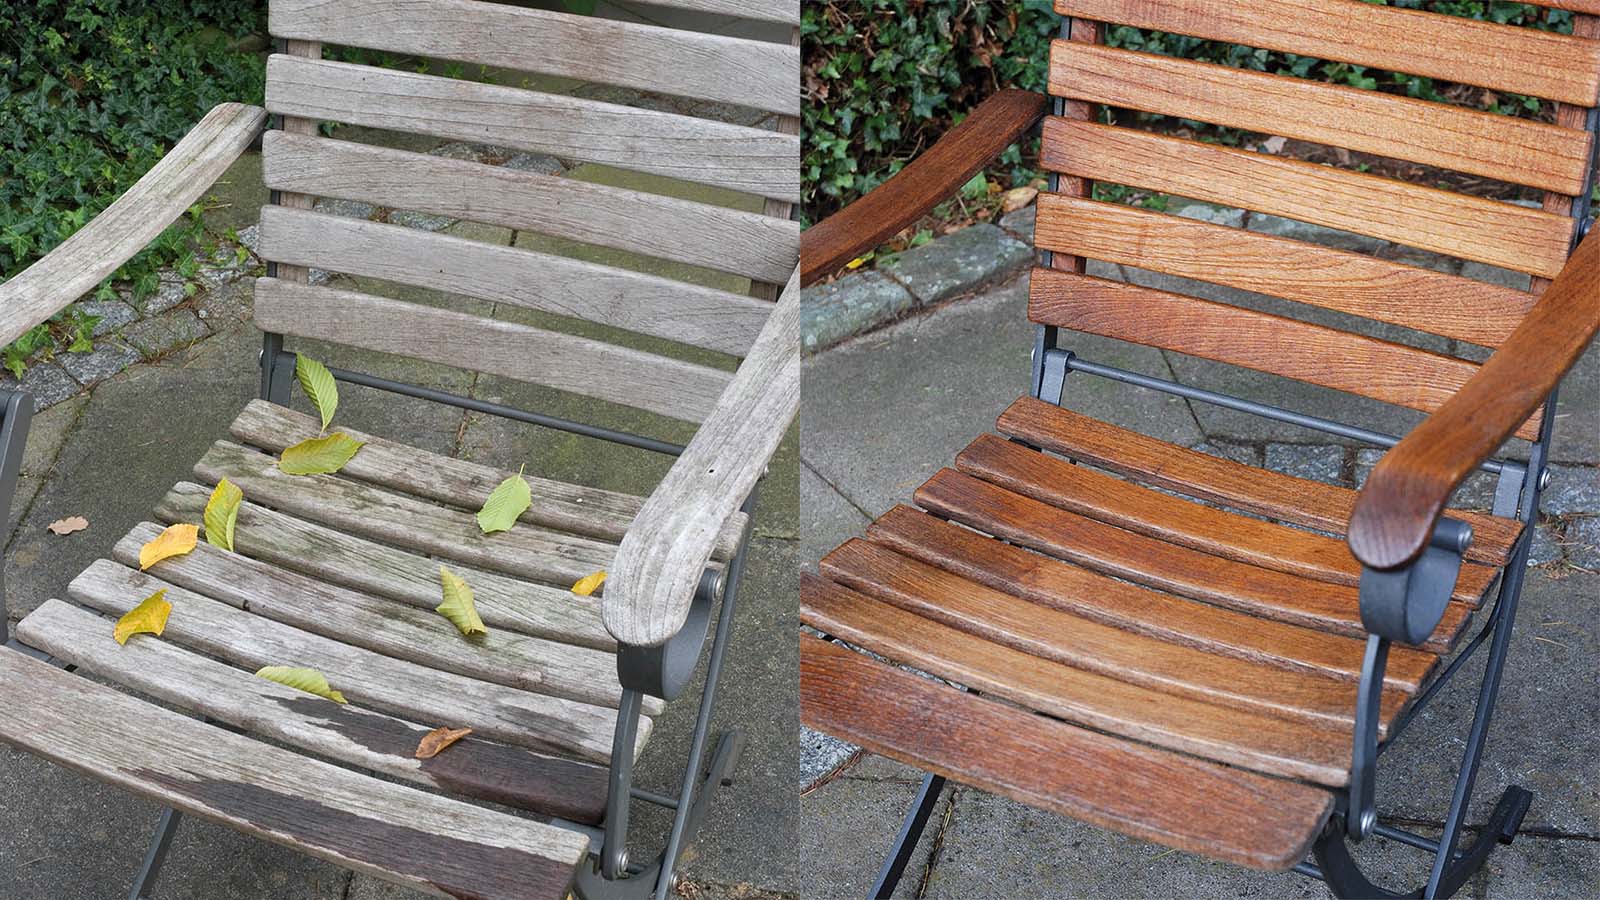 Renovate Wooden Garden Furniture With, Best Way To Apply Outdoor Furniture Oils